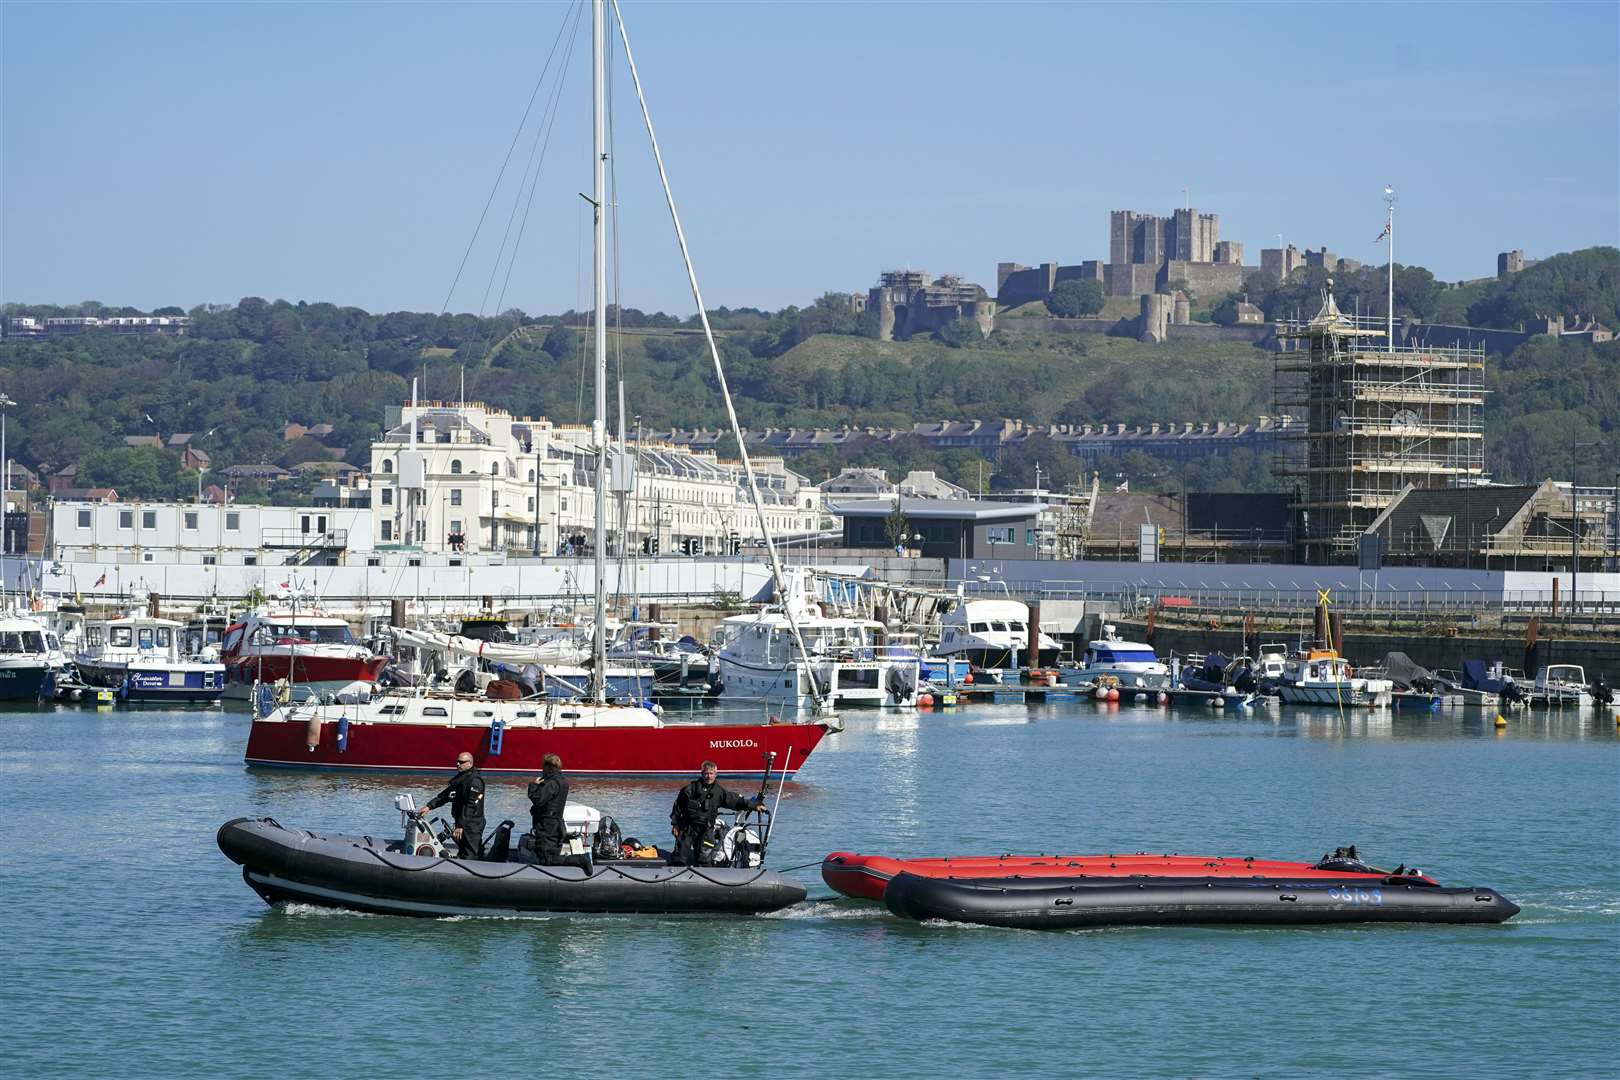 Boats used by a group of people thought to be migrants are brought in to Dover, Kent, by Border Force, following a small boat incident in the Channel (Steve Parsons/PA)